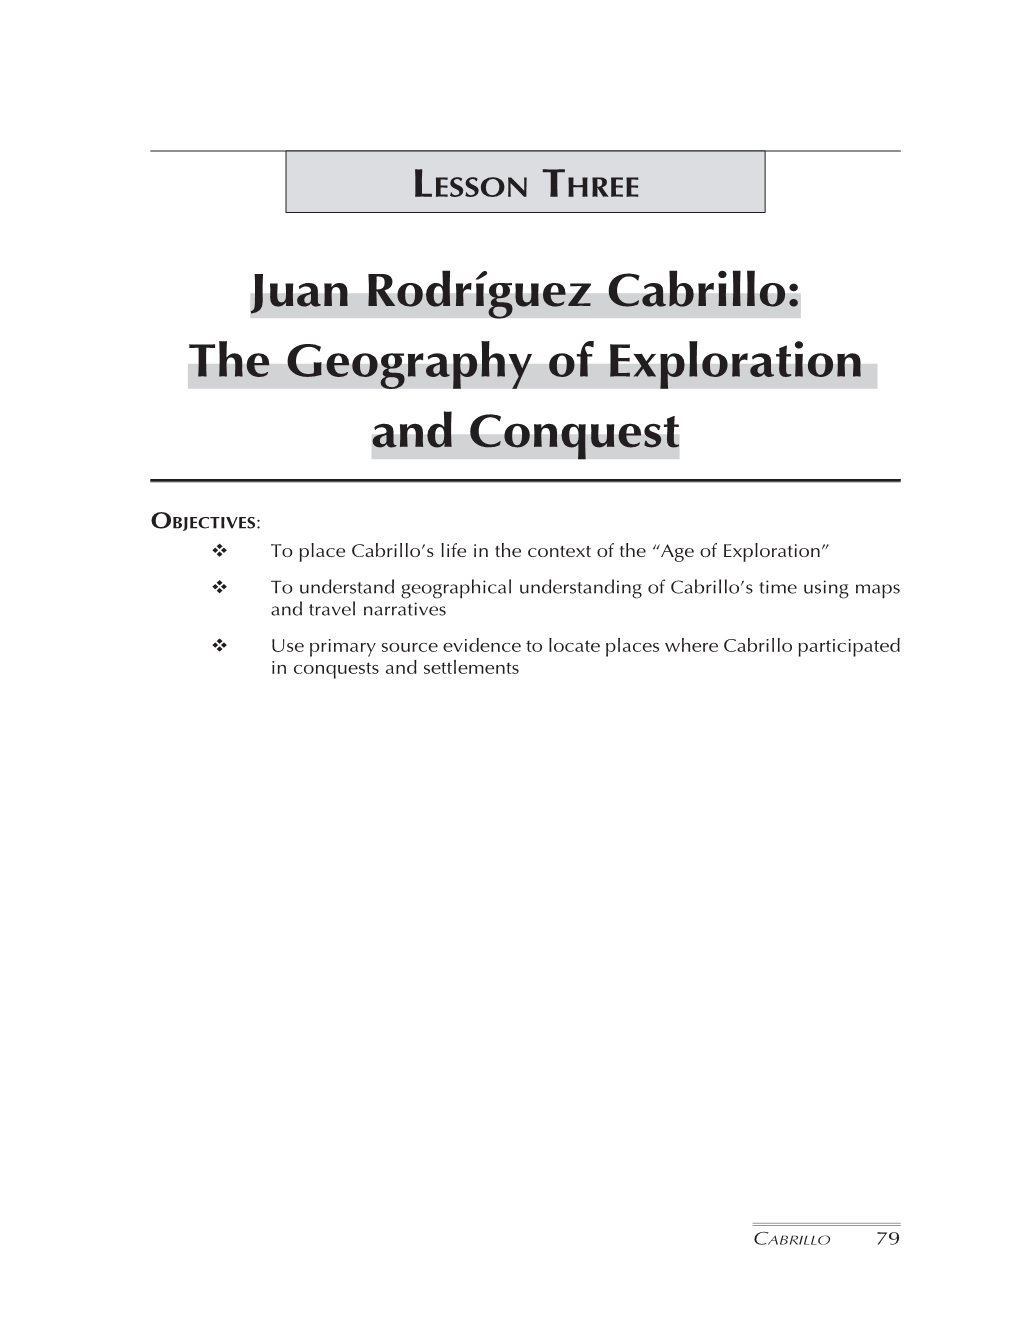 Juan Rodríguez Cabrillo: the Geography of Exploration and Conquest